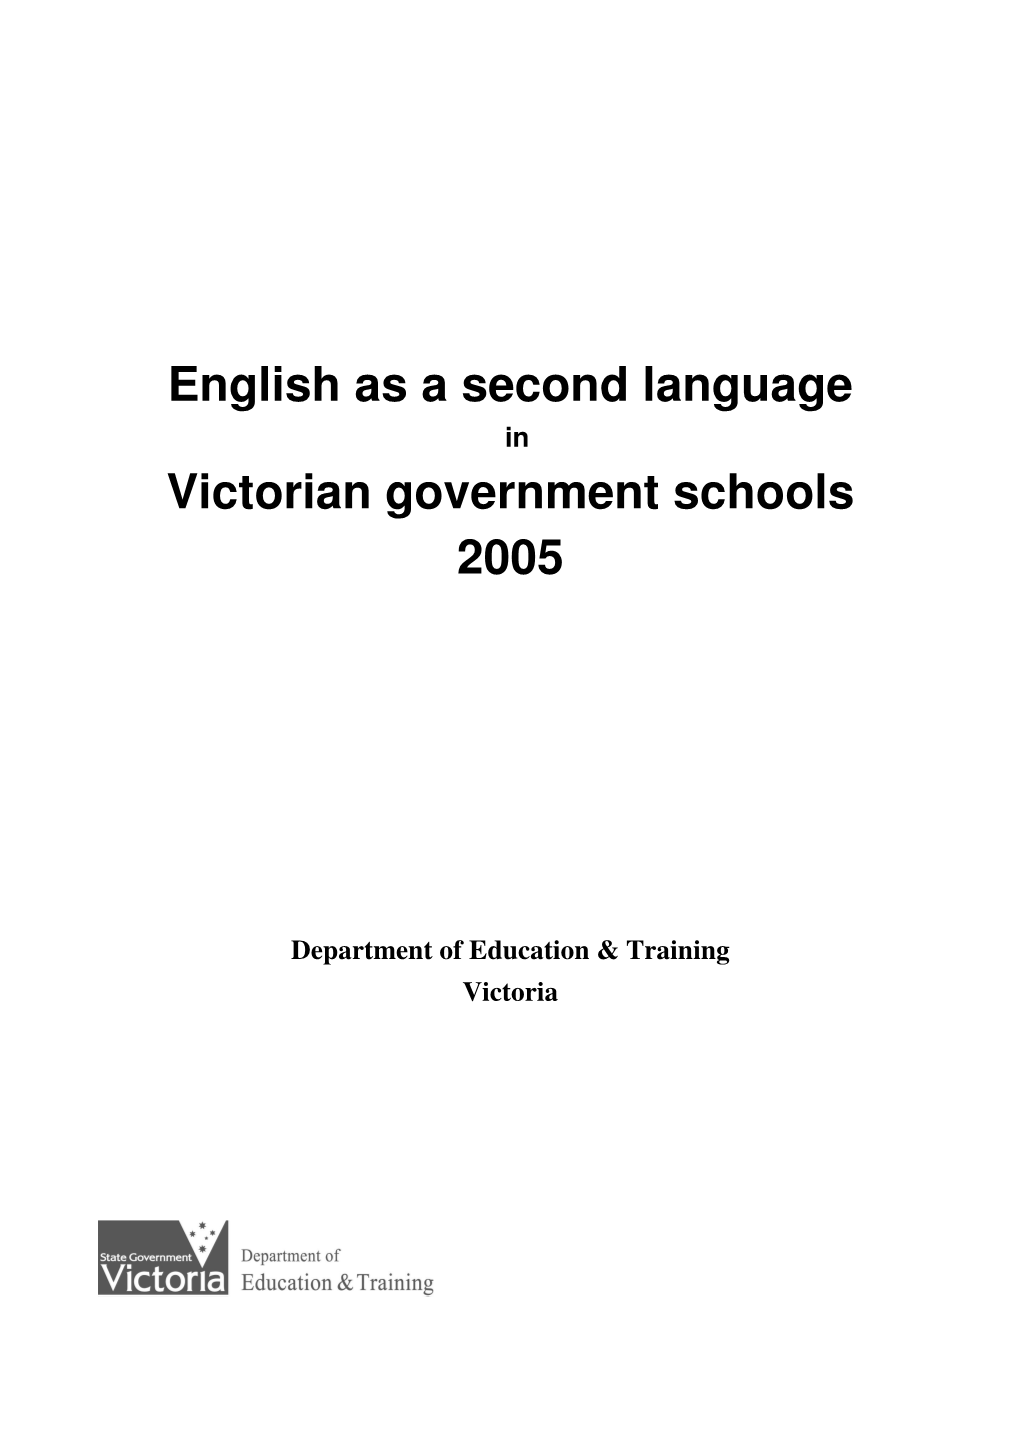 English As a Second Language Victorian Government Schools 2005